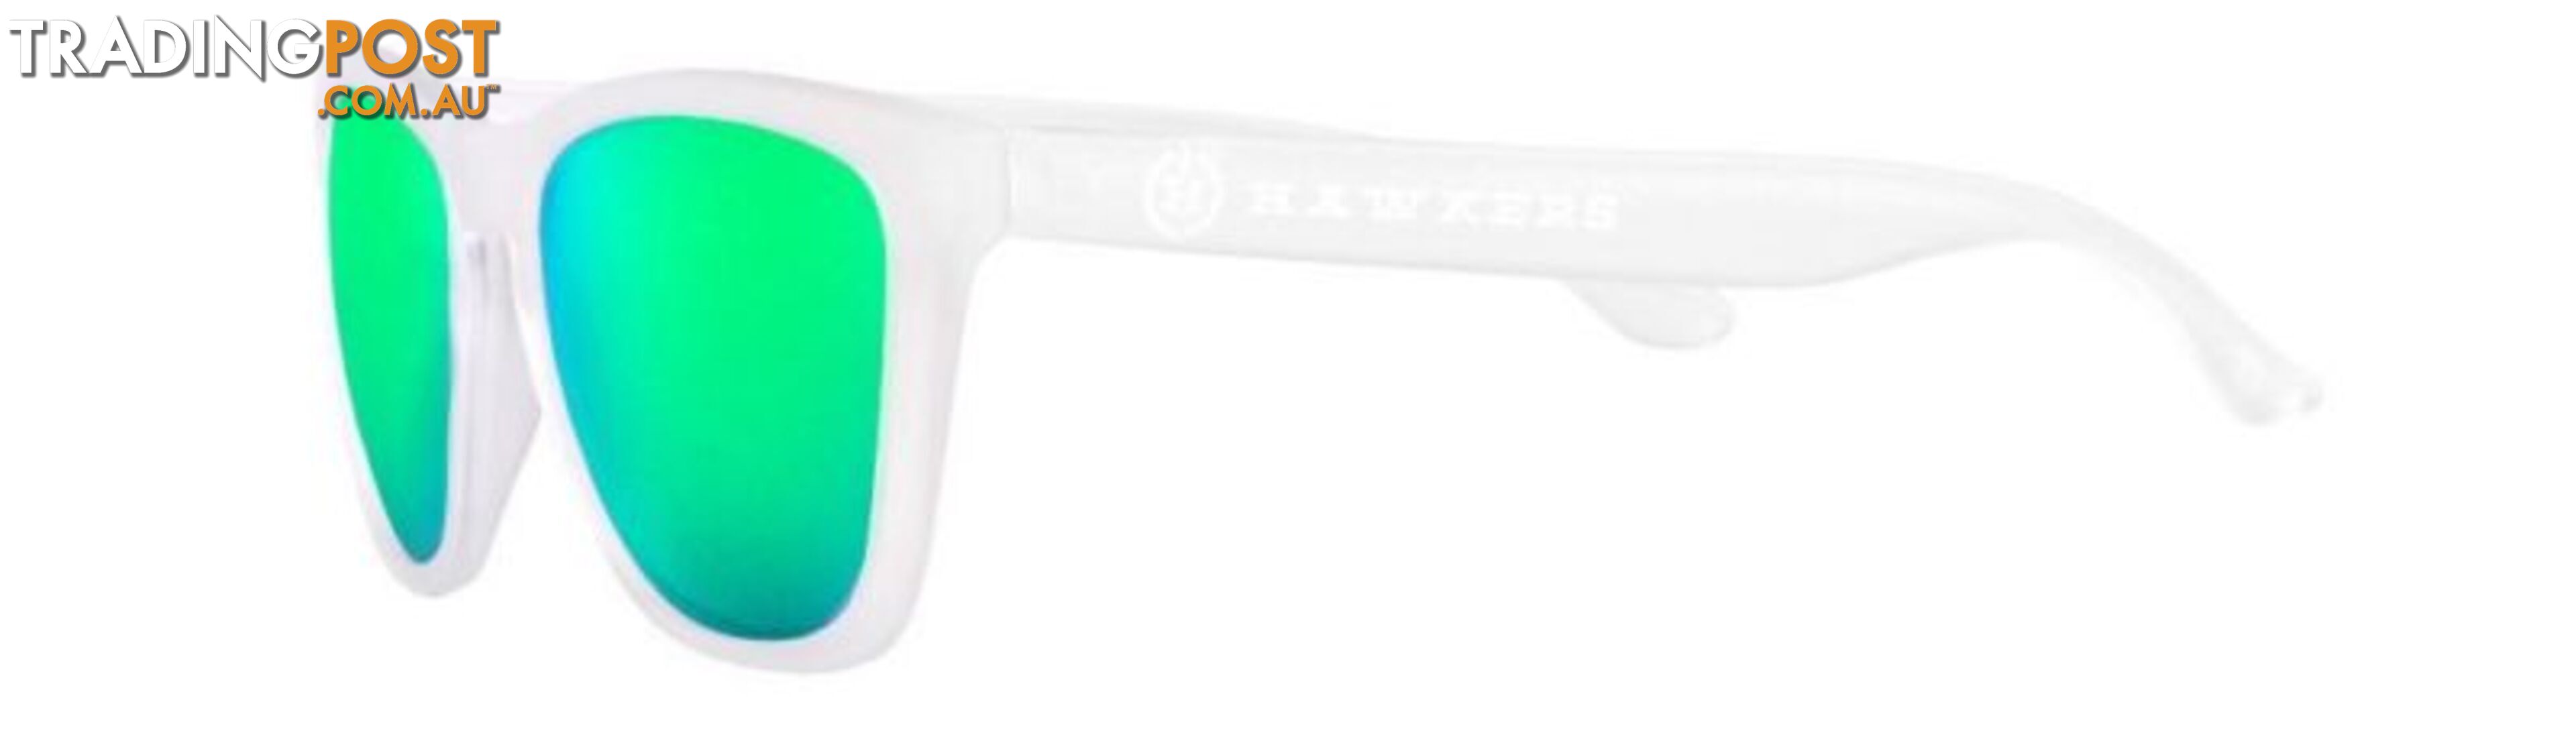 NEW HAWKERS SUNGLASSES WHOLESALE PRICE CLEARANCE SALE